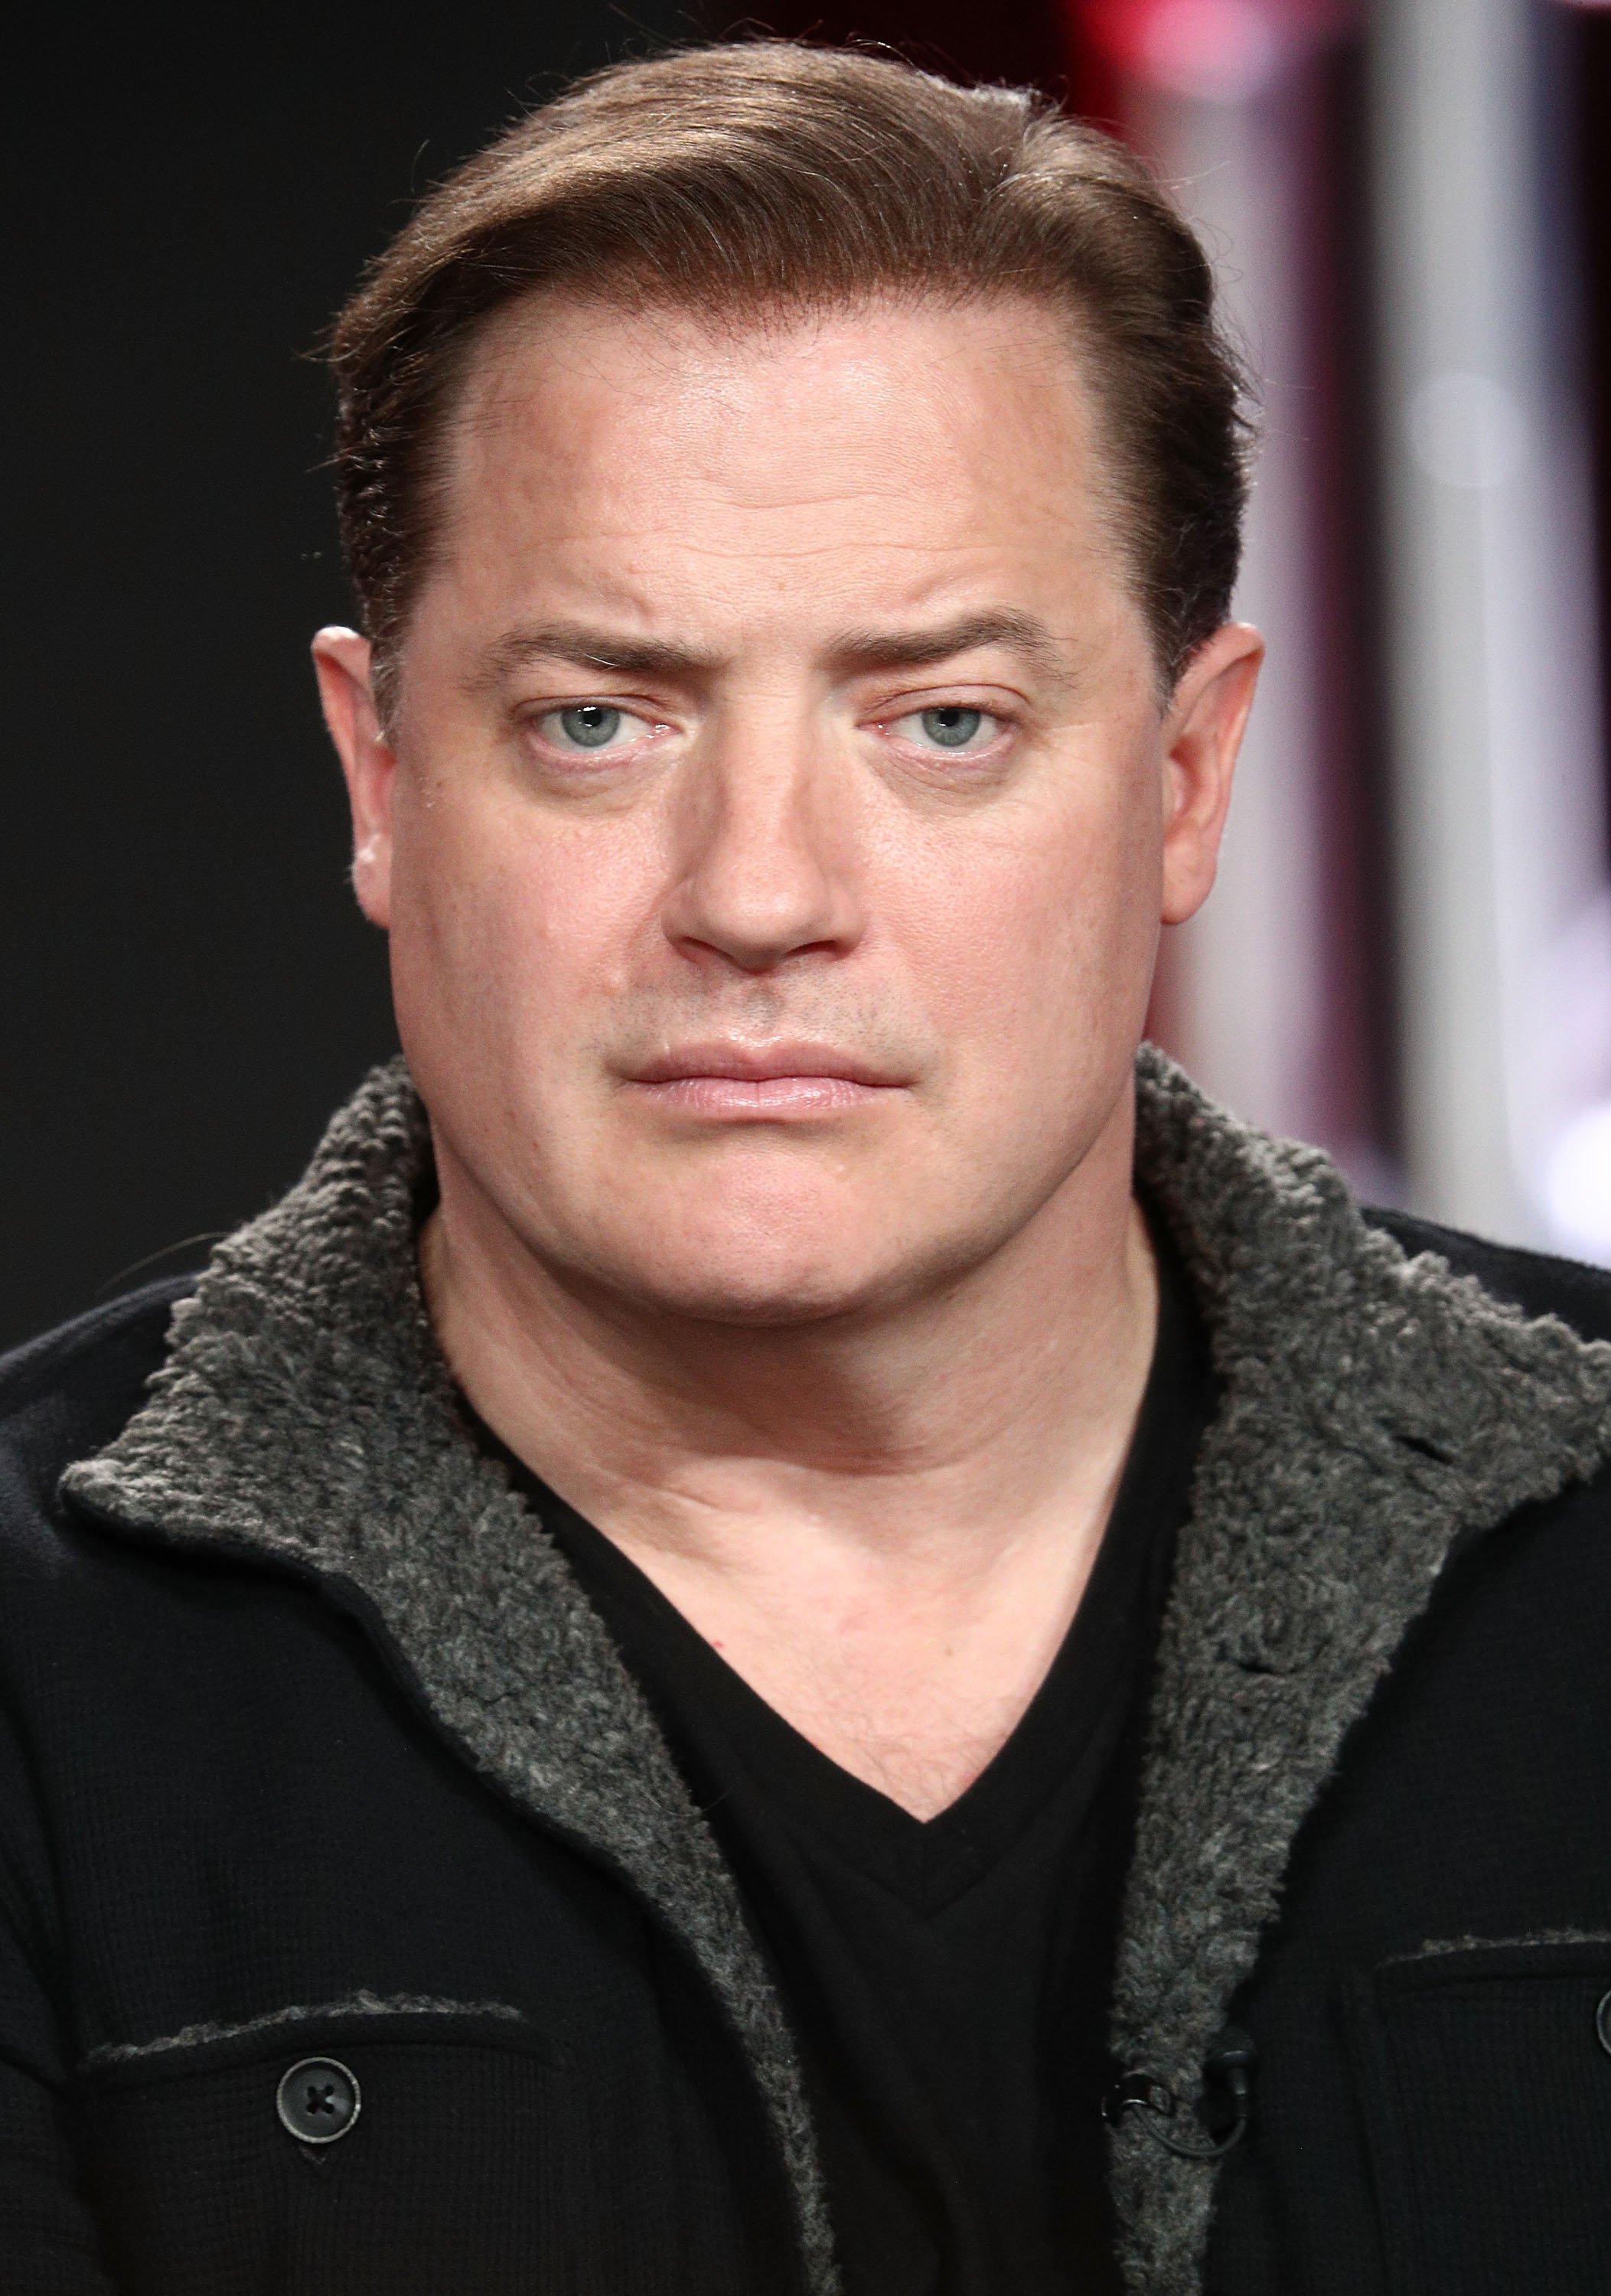 Brendan Fraser onstage during the AT&T Audience Network portion of the Winter Television Critics Association Press Tour on January 11, 2018, in Pasadena, California | Source: Getty Images